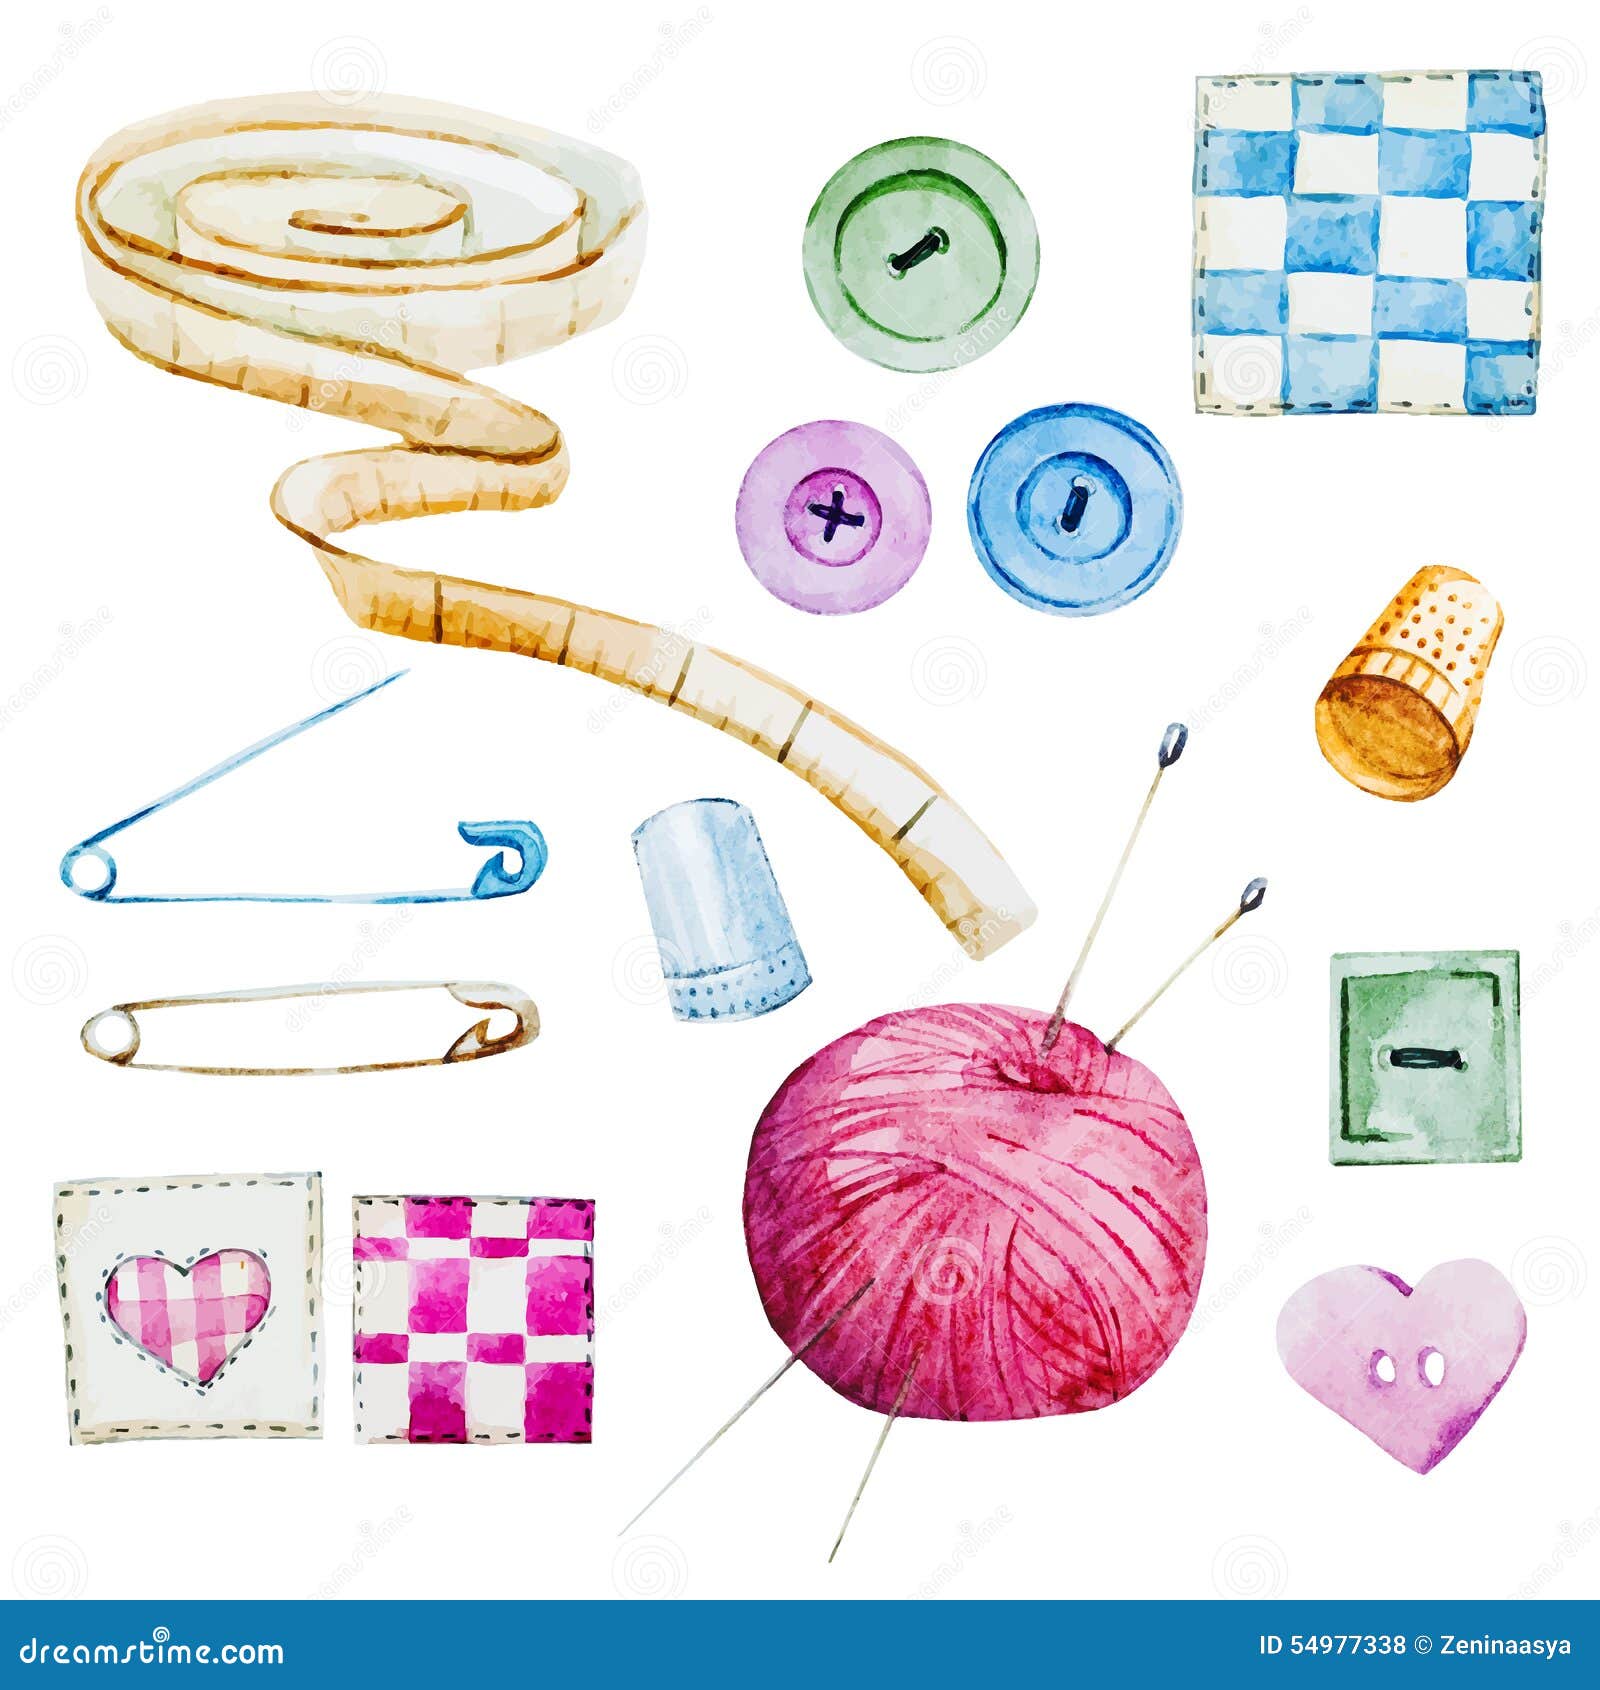 Sewing Pin Clipart, Sewing Clip Art Needle Seamstress String Twine